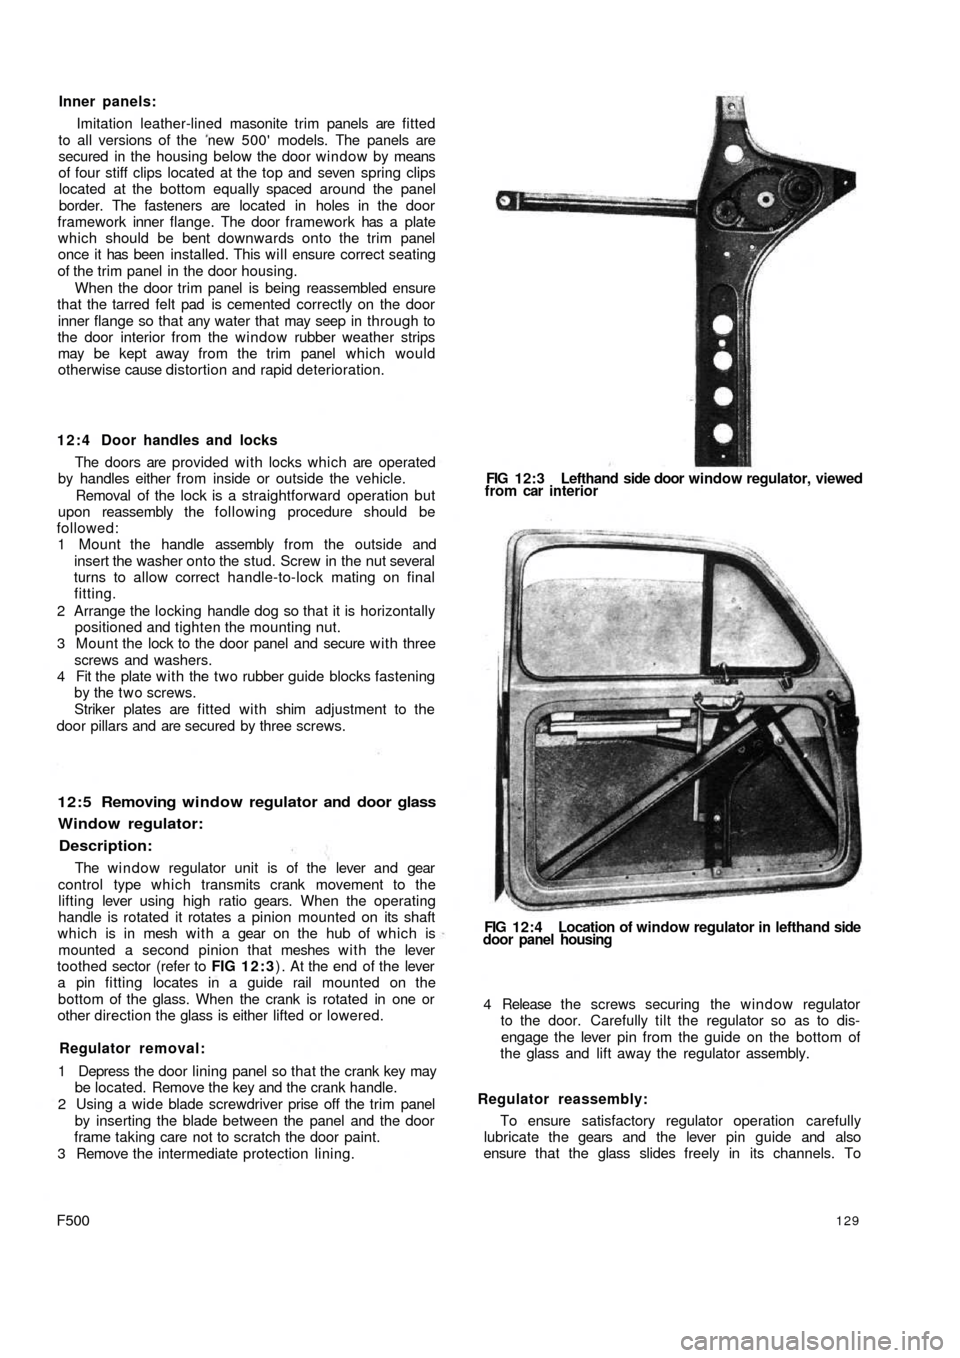 FIAT 500 1969 1.G Workshop Manual Inner panels:
Imitation leather-lined masonite trim panels are fitted
to all versions of the  new 500 models. The panels are
secured in the housing below the door window by means
of four stiff clips 